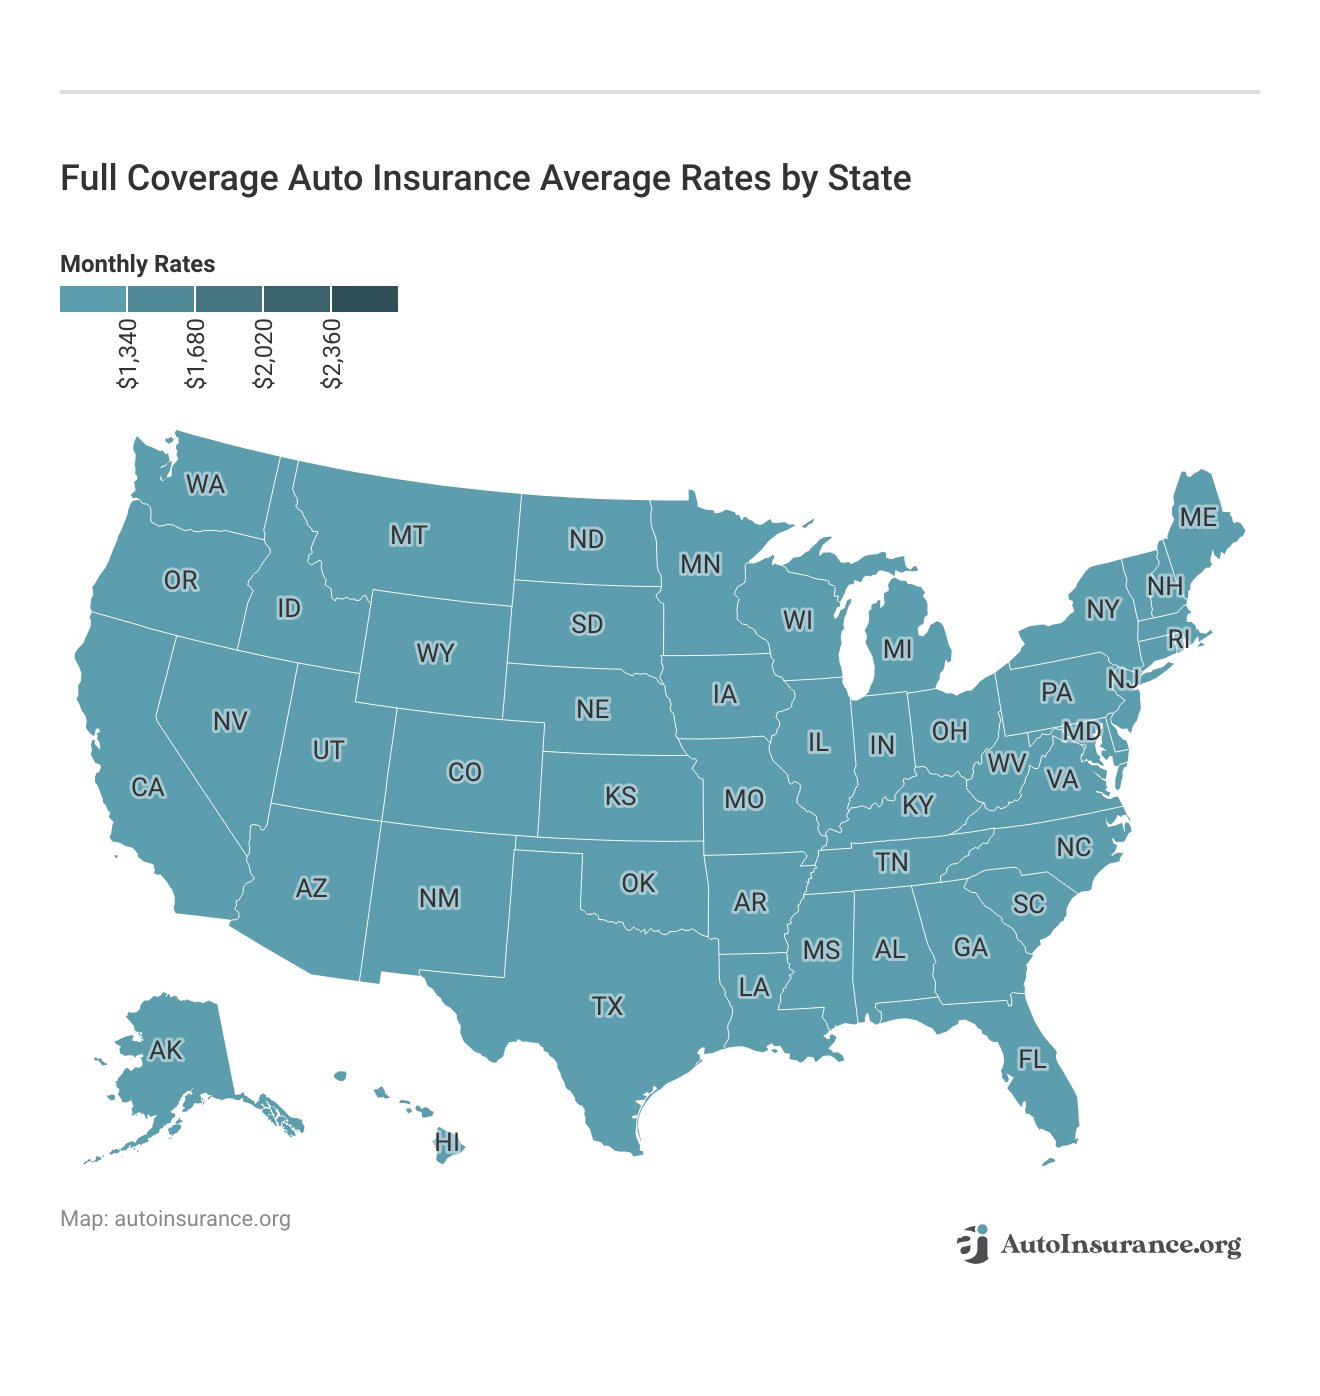 <h3>Full Coverage Auto Insurance Average Rates by State</h3>